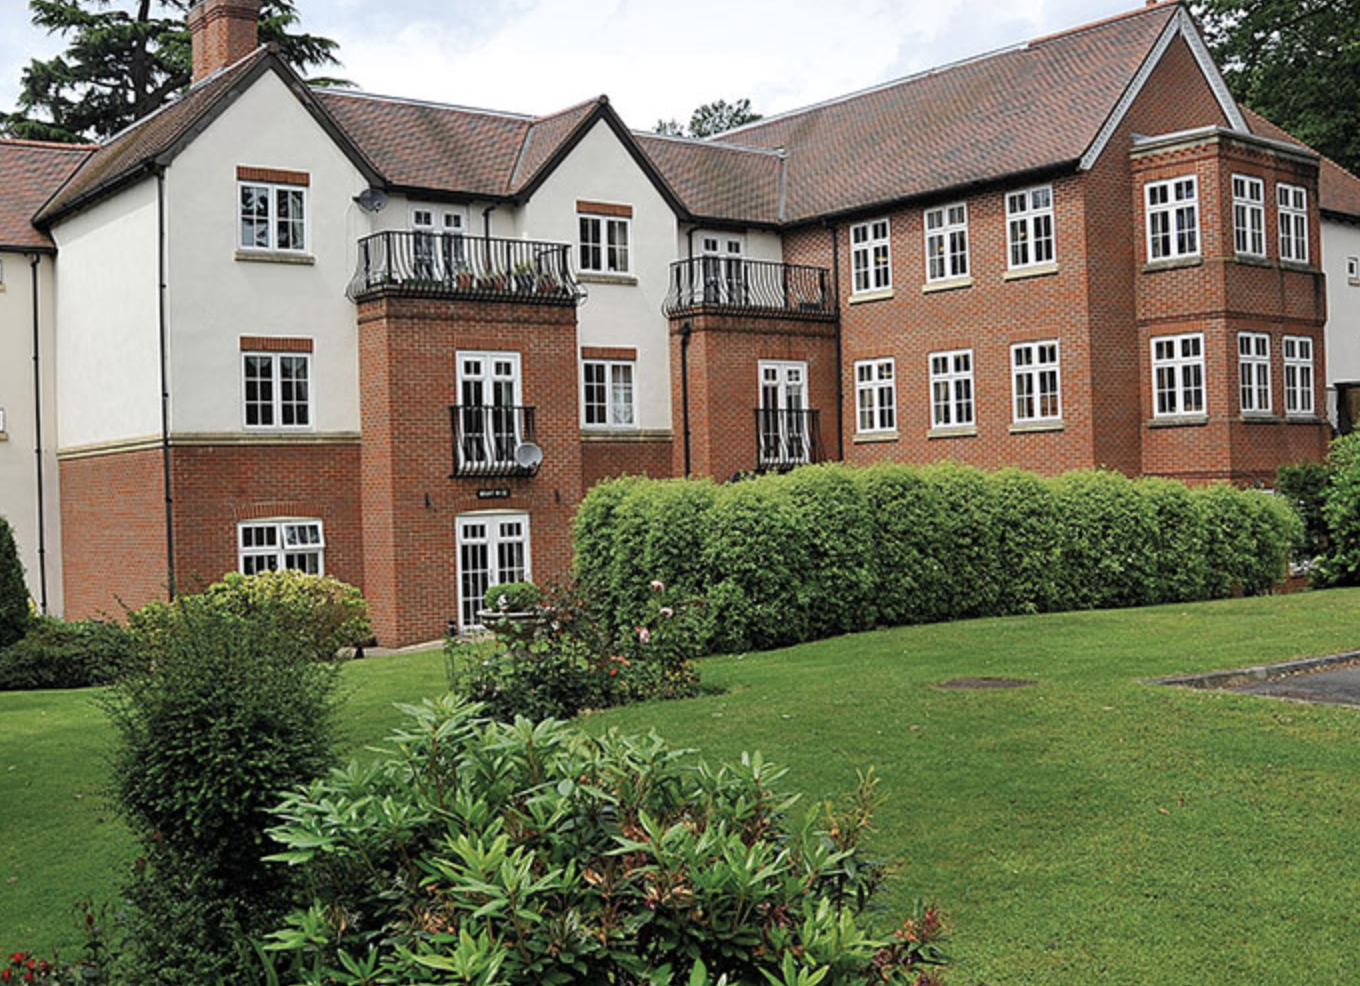 Exterior of Erskine Hall care home in Northwood, London